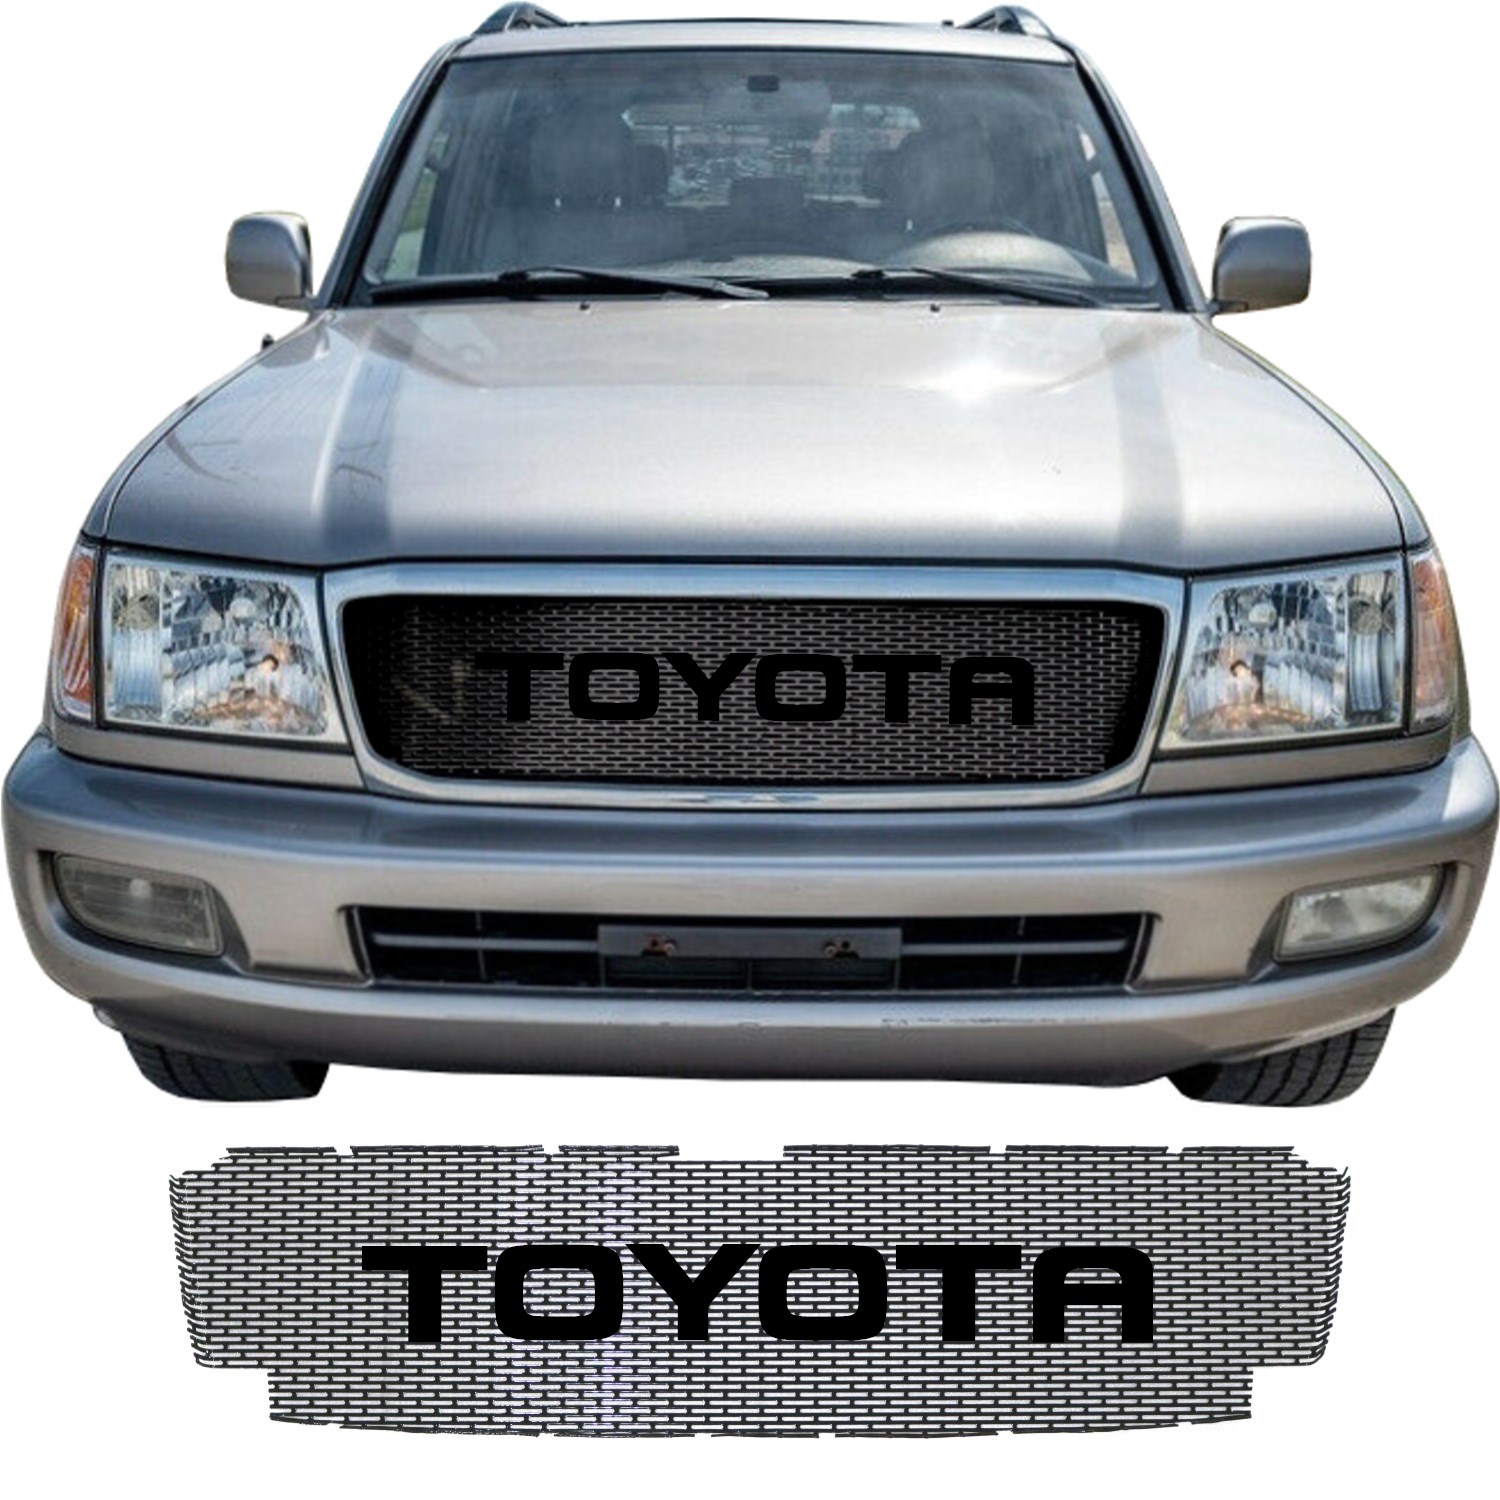 2003 - 2005 Toyota Land Cruiser Series 100 Grill Mesh and Big Letters